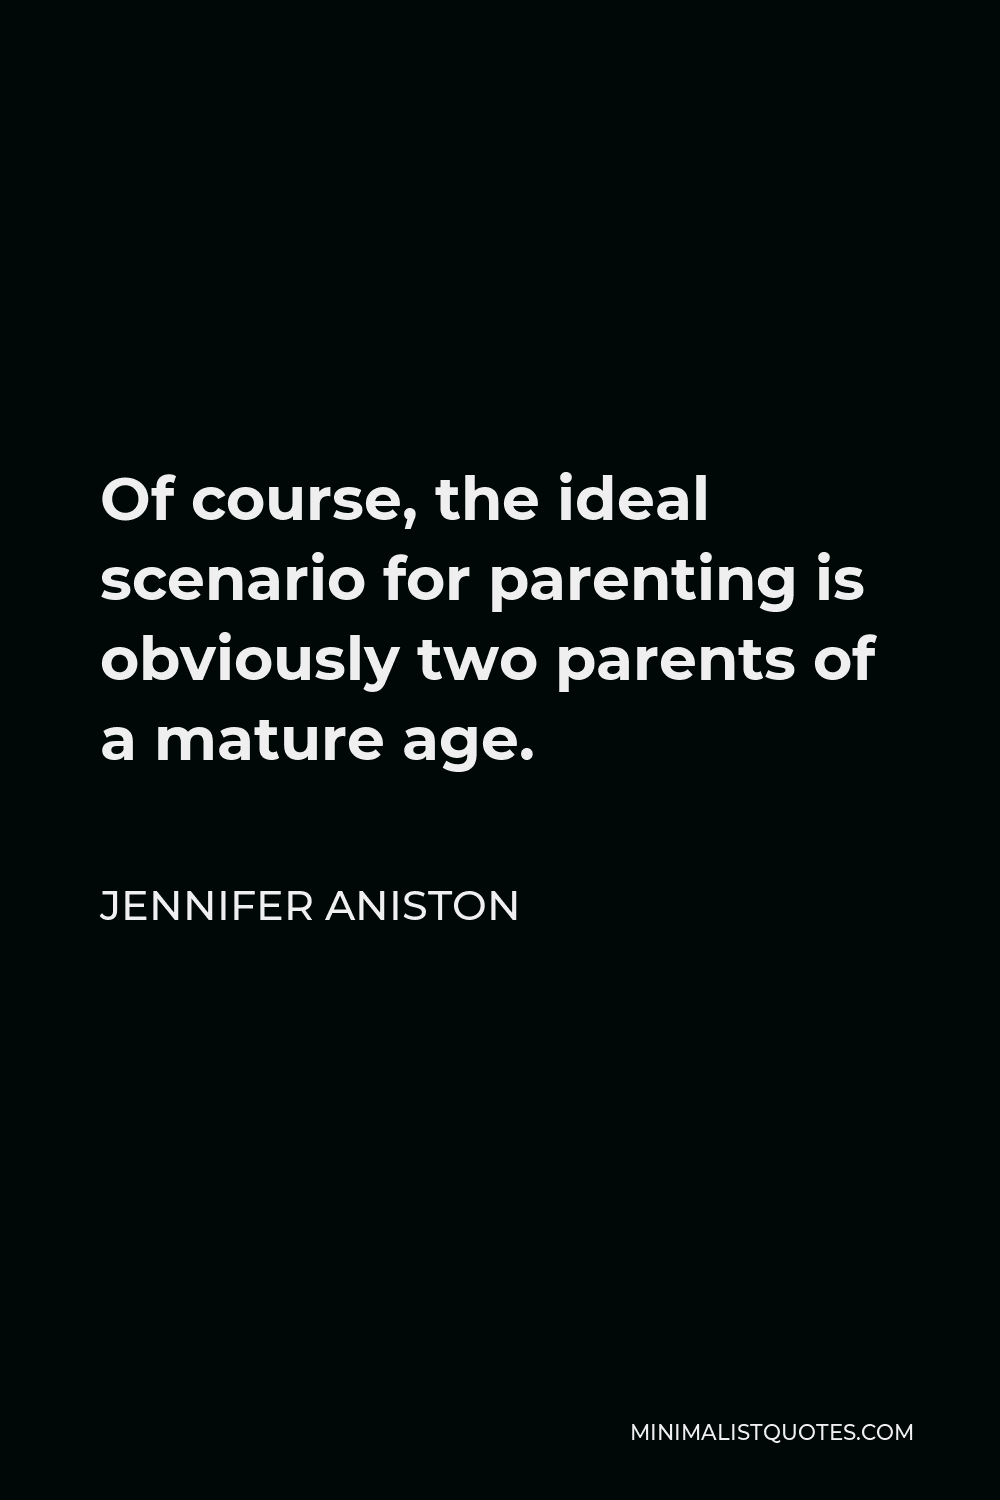 Jennifer Aniston Quote - Of course, the ideal scenario for parenting is obviously two parents of a mature age.